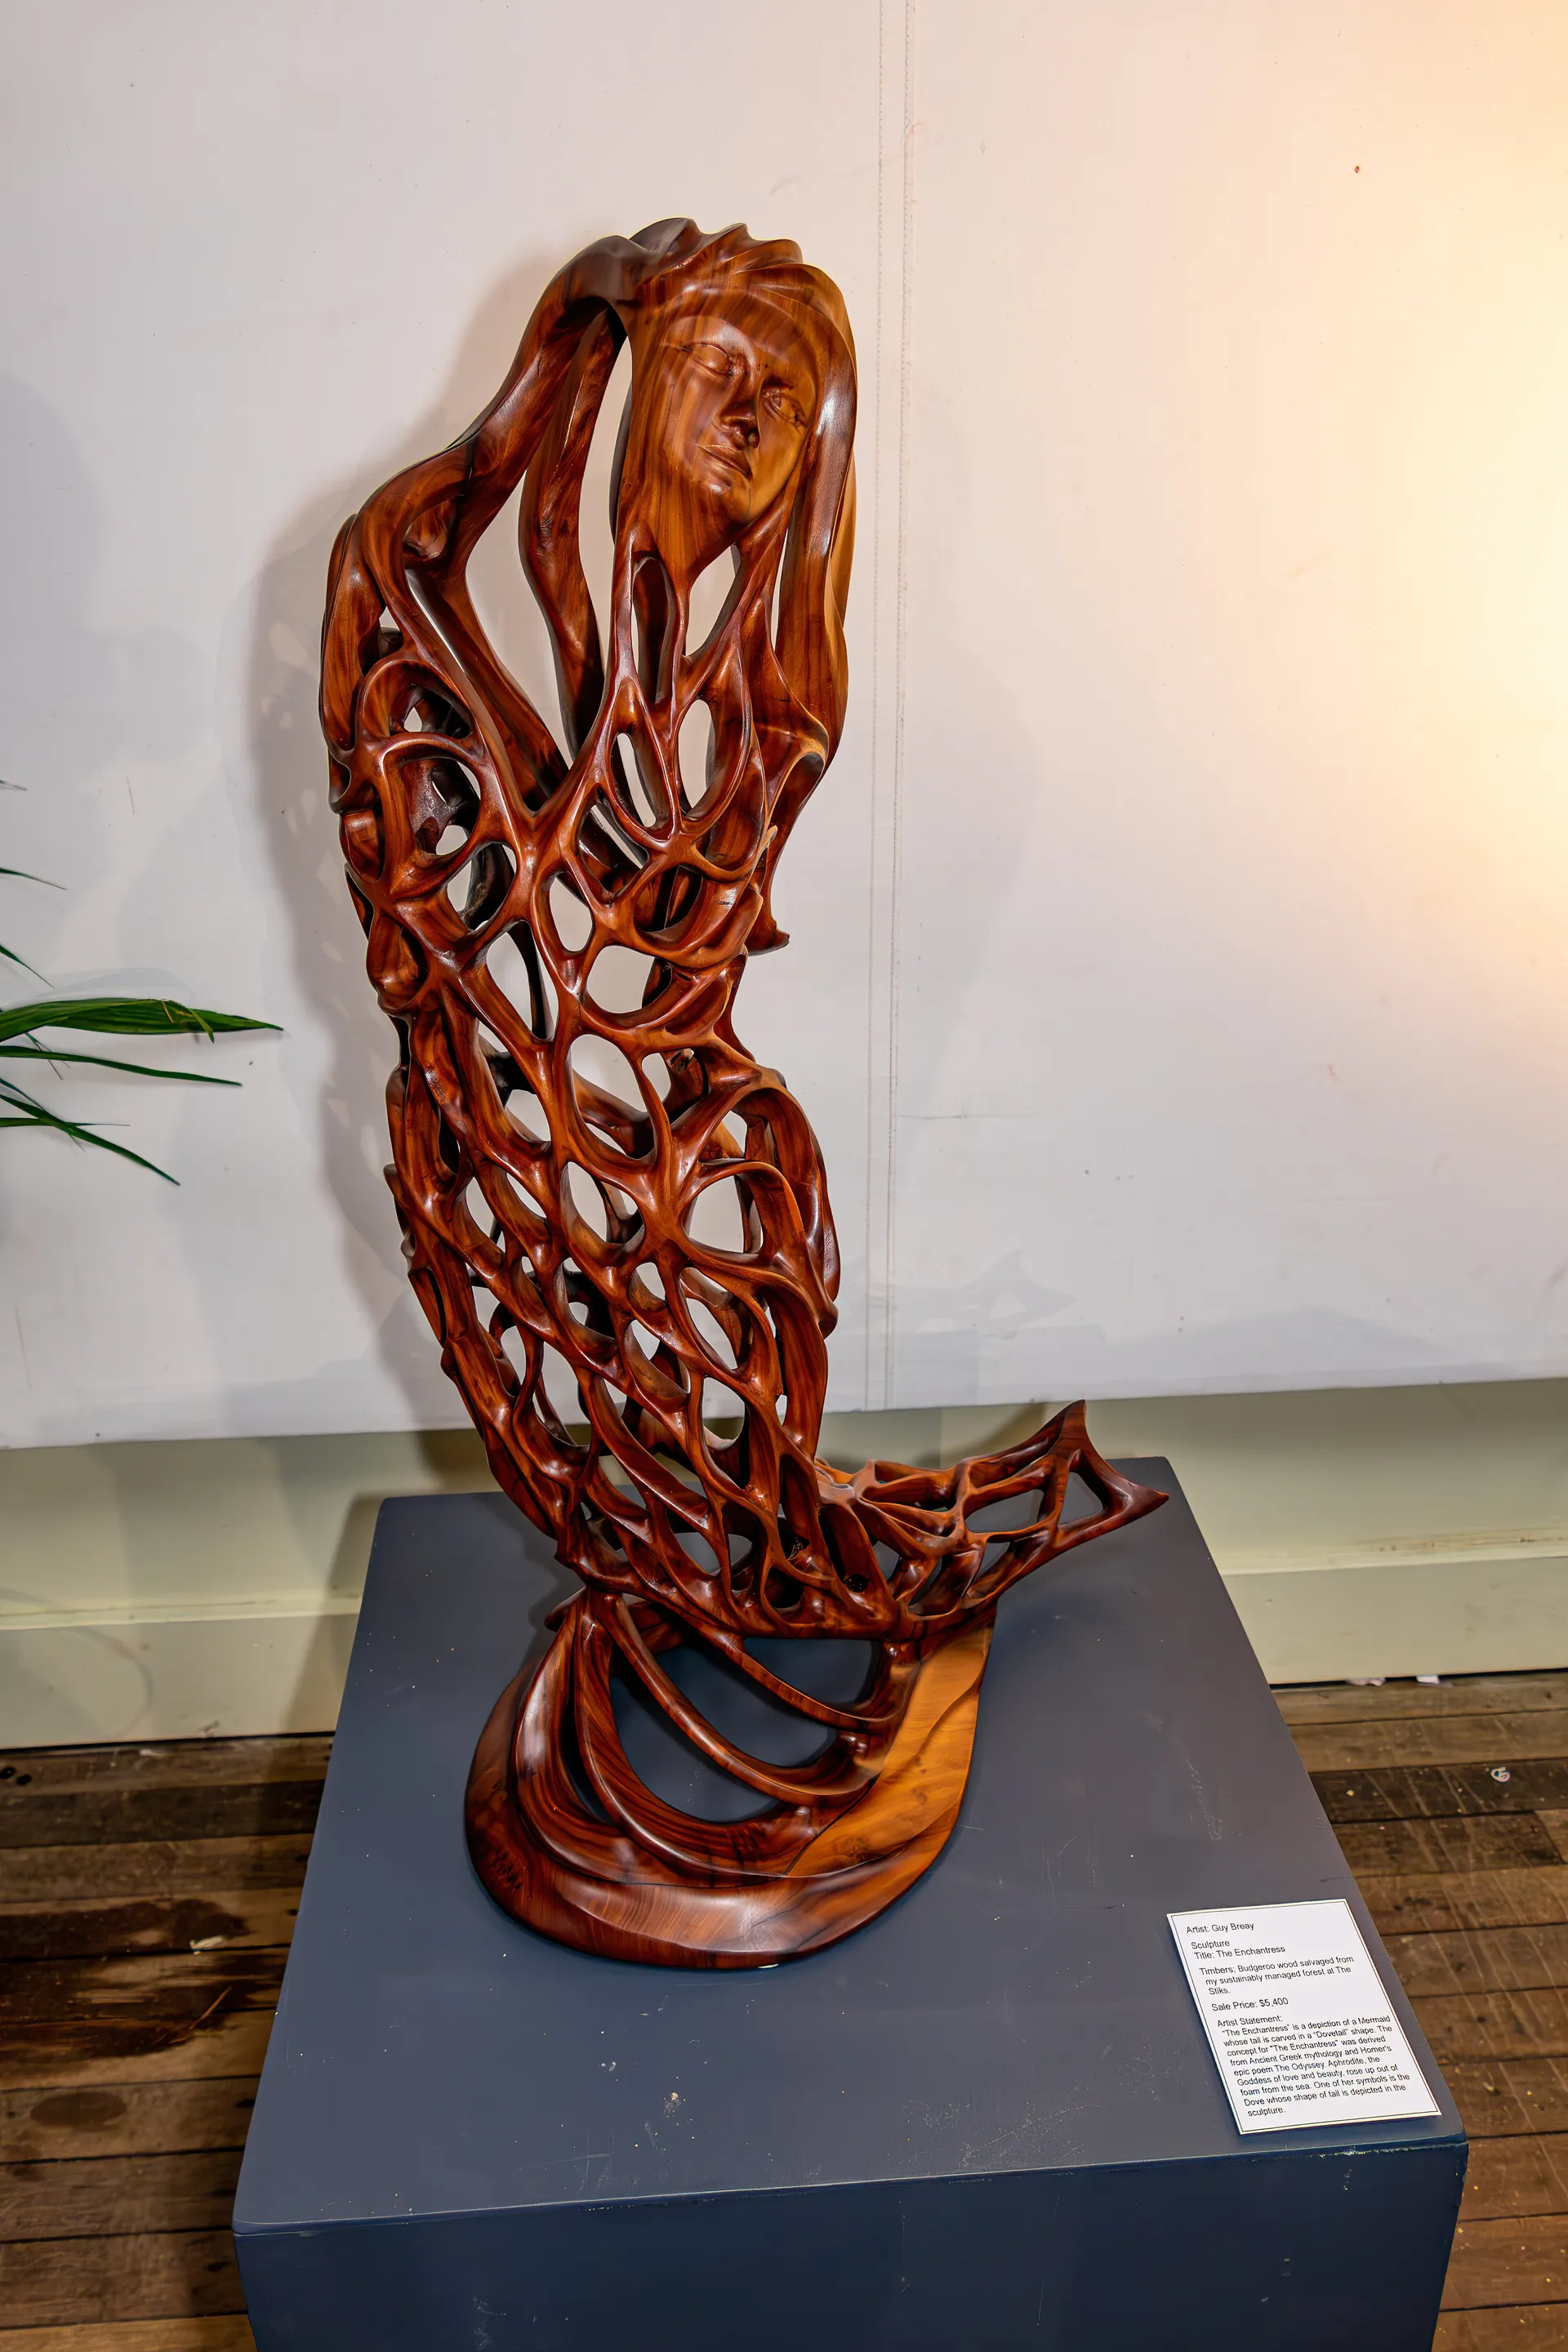 Sculpture _The Enchantress_ by Guy Breay - 2023 entry to Sunshine Coast Wootha Prize - Image by Steve Swayne